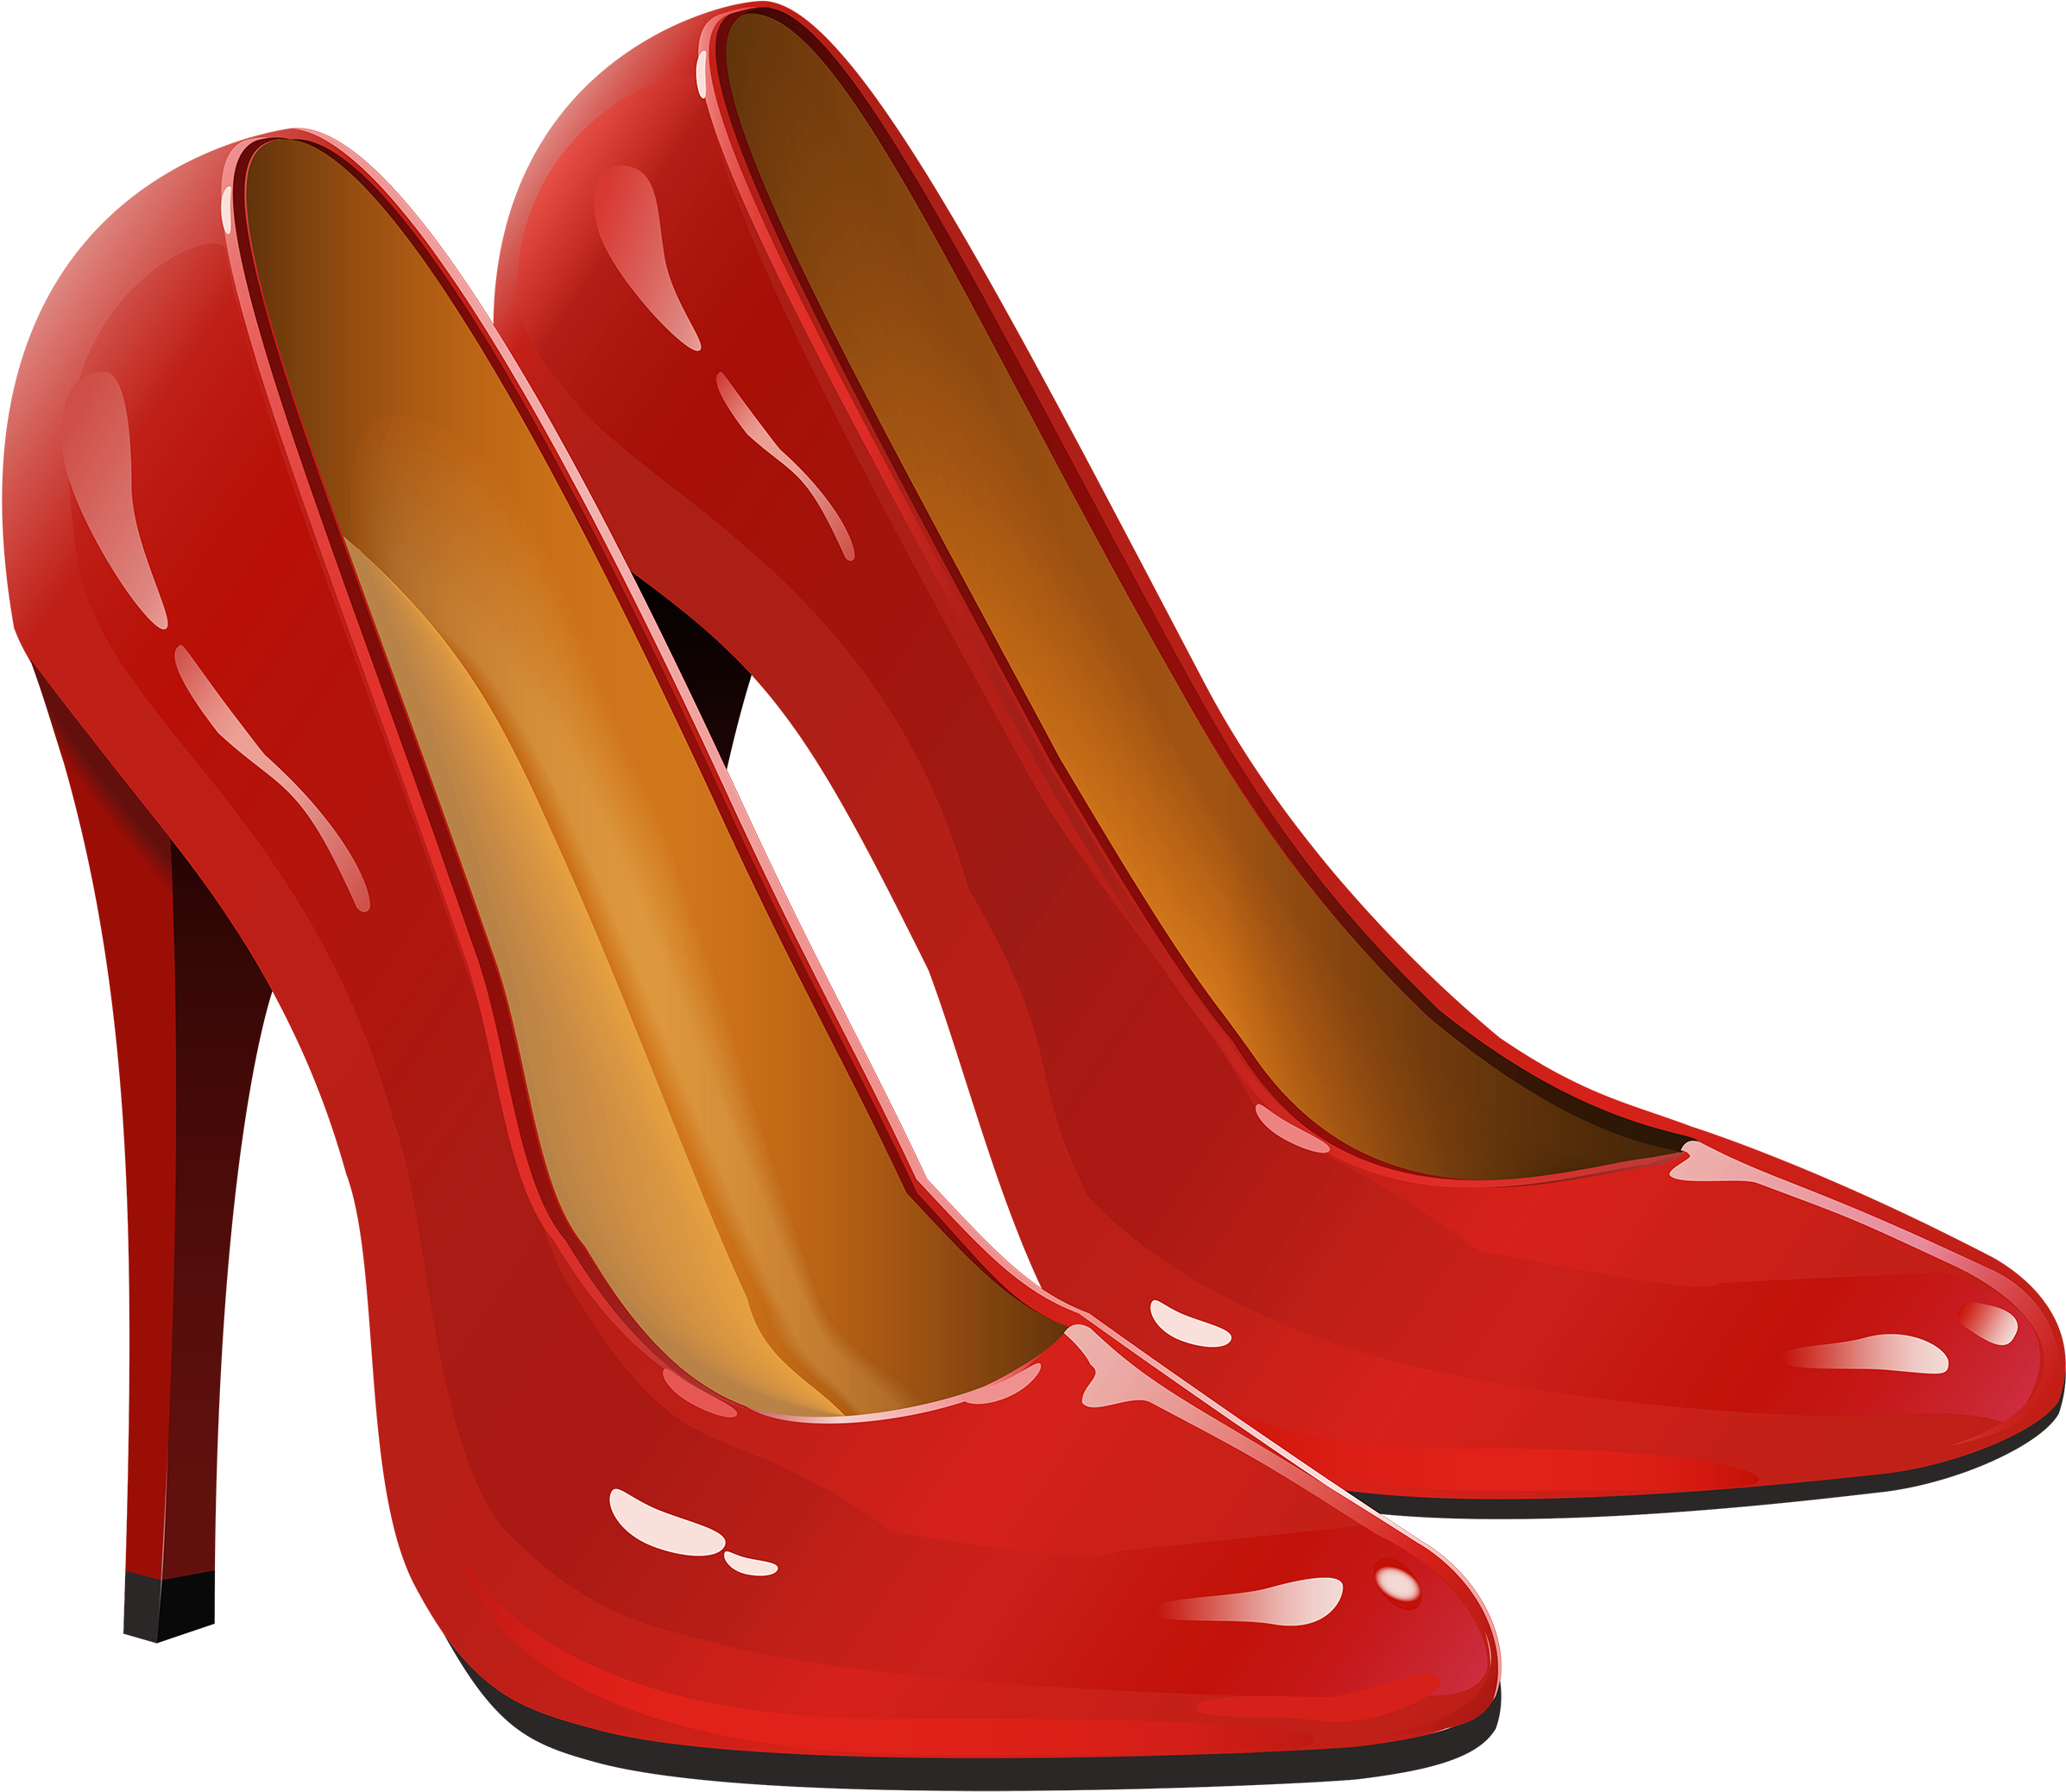 Red Women Shoes Png Transparent Image Clipart Shoes - Clip Art Library